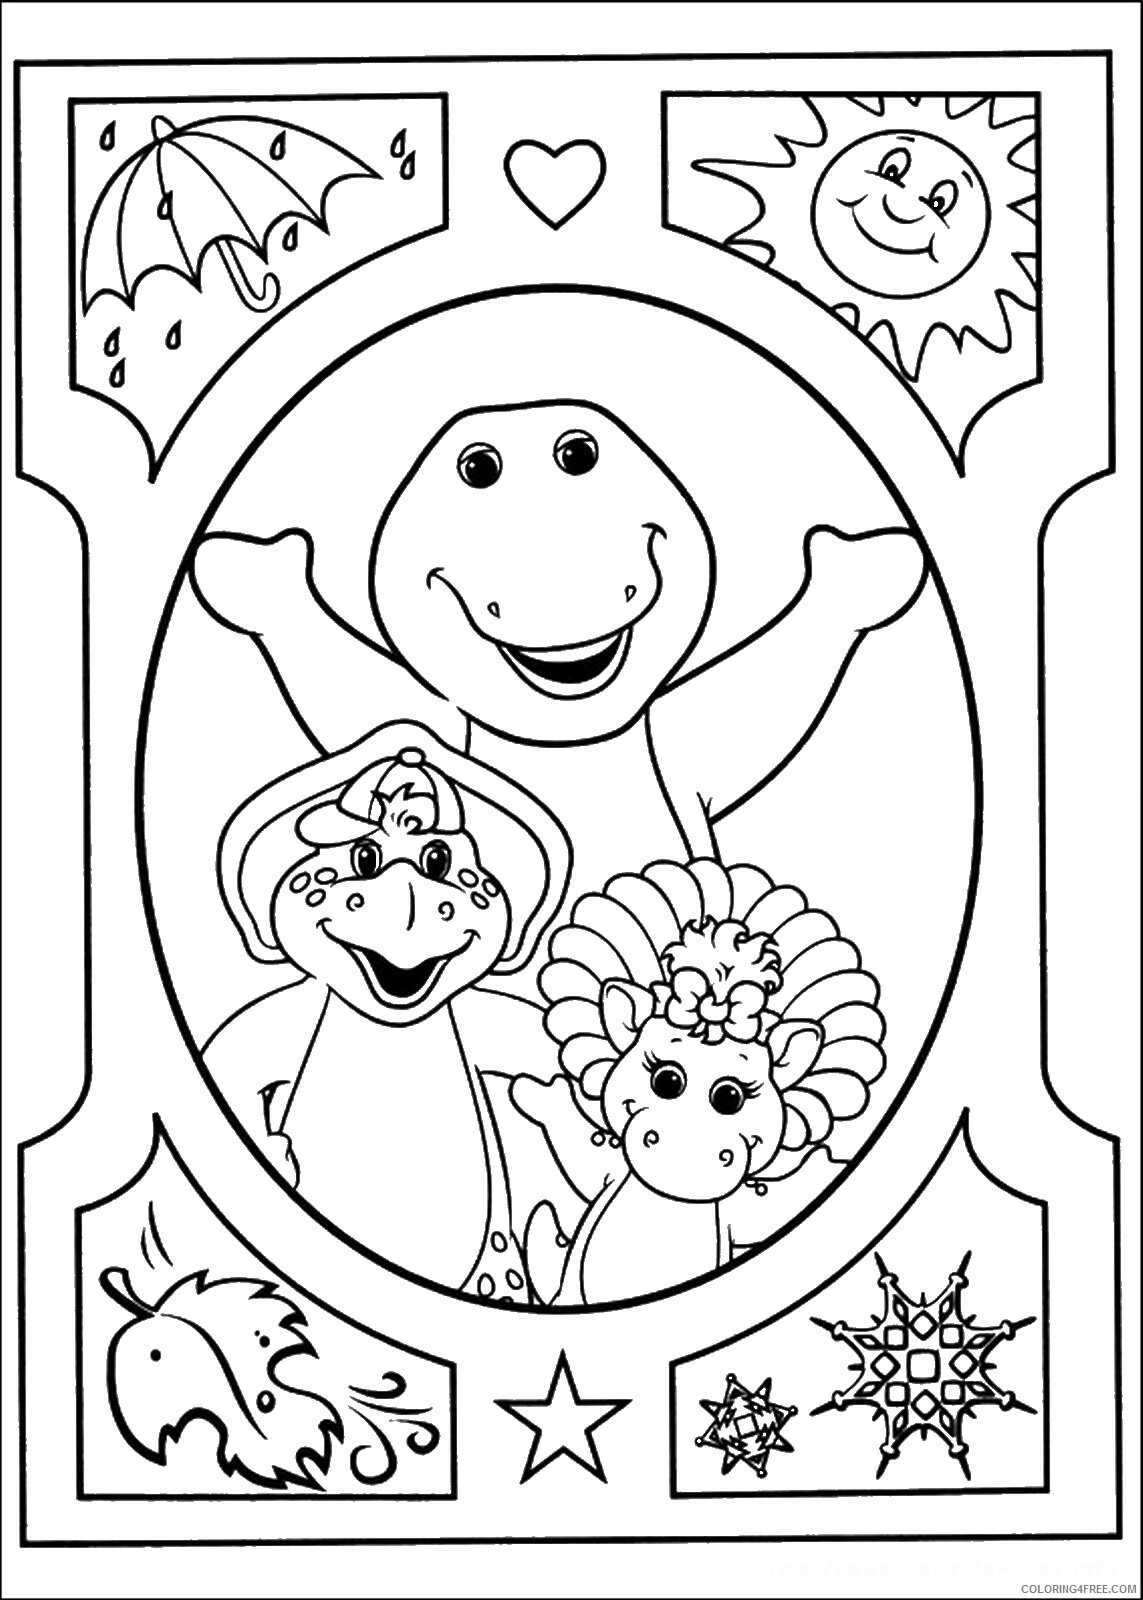 Barney and Friends Coloring Pages TV Film barney_cl_1056 Printable 2020 00629 Coloring4free